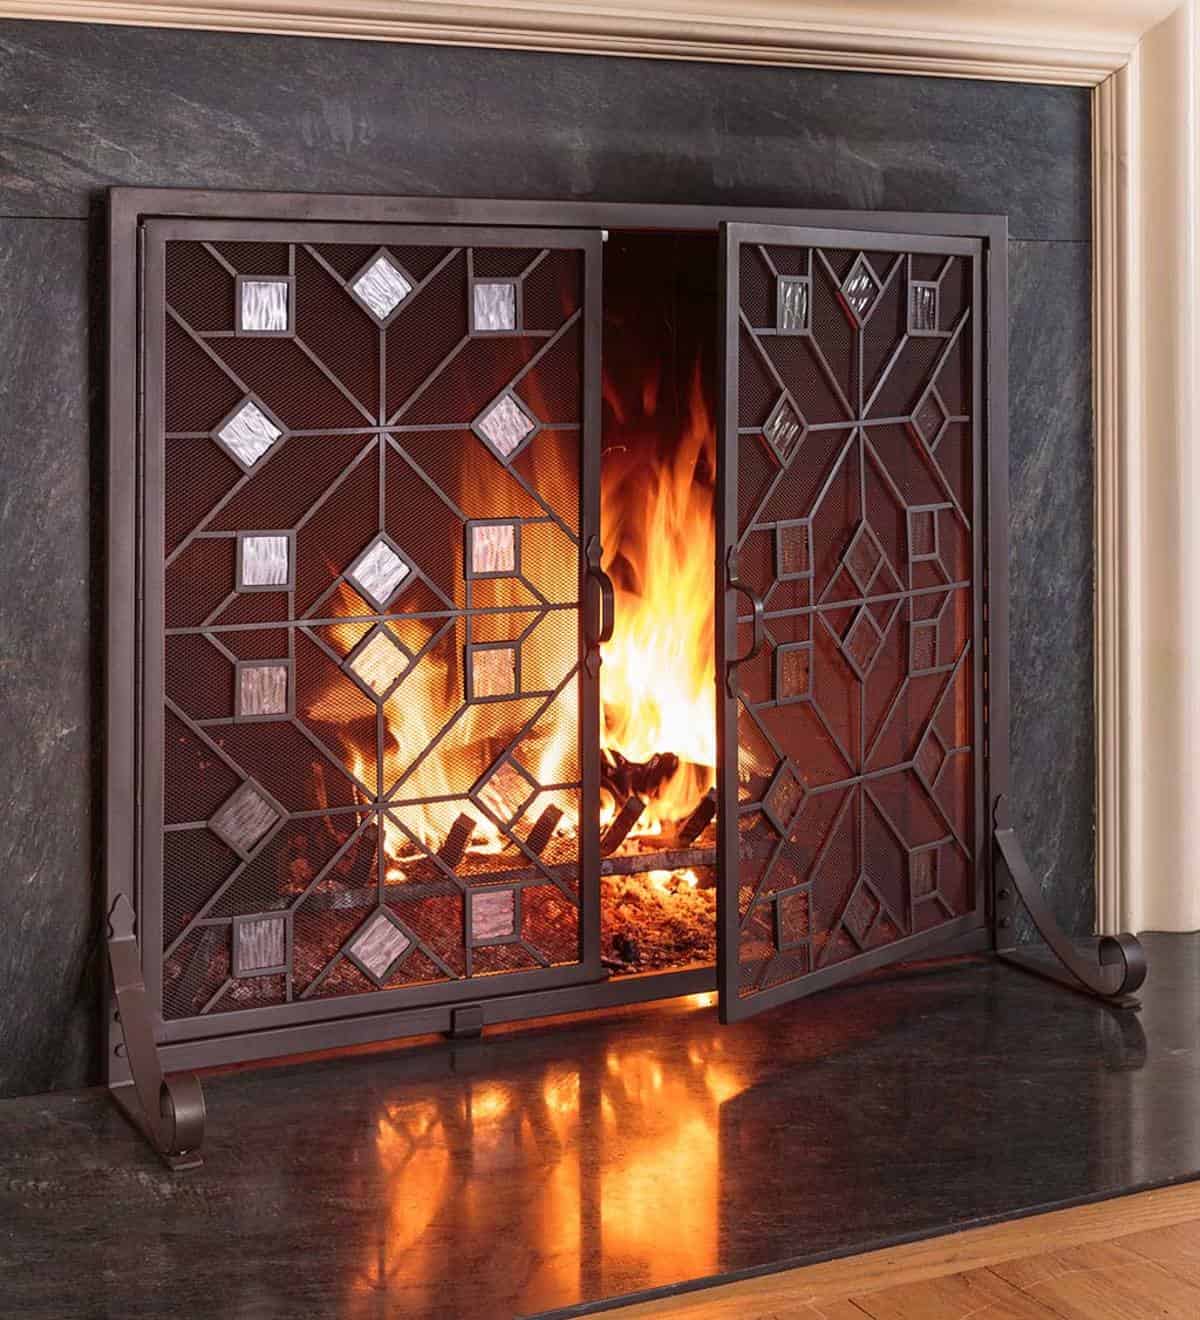 Large American Star Fireplace Fire Screen With Glass Accents And Doors